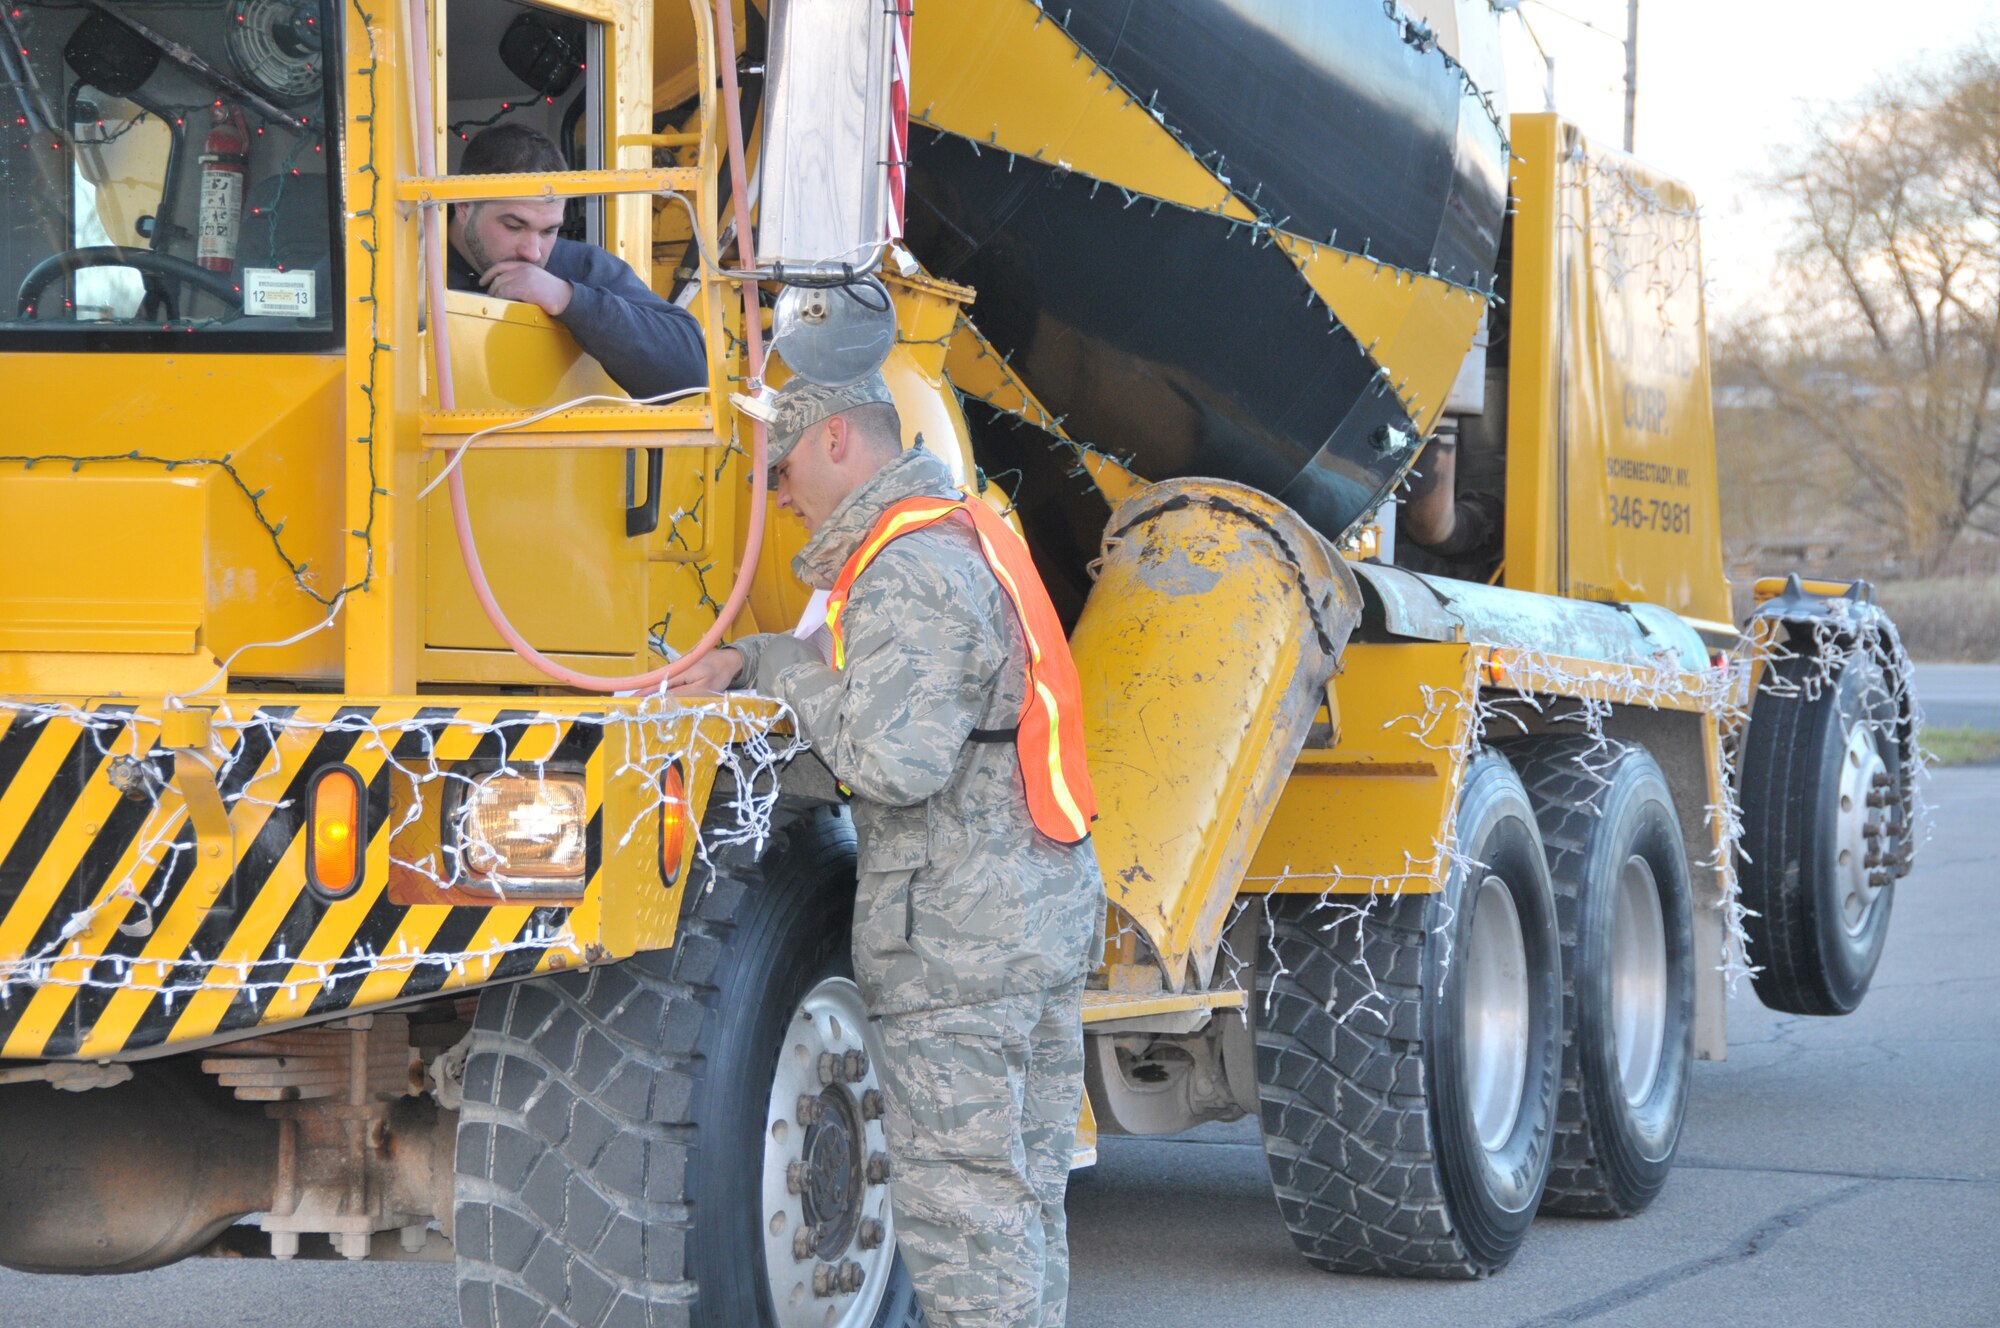 SCHENECTADY, N.Y. -- 2nd Lt. Jared Semerad, 109th Logistics Readiness Squadron, directs a parade participant where to park in preparation for the 46th annual Gazette Holiday Parade on Nov. 23, 2013. About 20 volunteers with the 109th Airlift Wing, including some family members, volunteered to help usher the floats in for the parade. (Air National Guard photo by Tech. Sgt. Catharine Schmidt/Released)